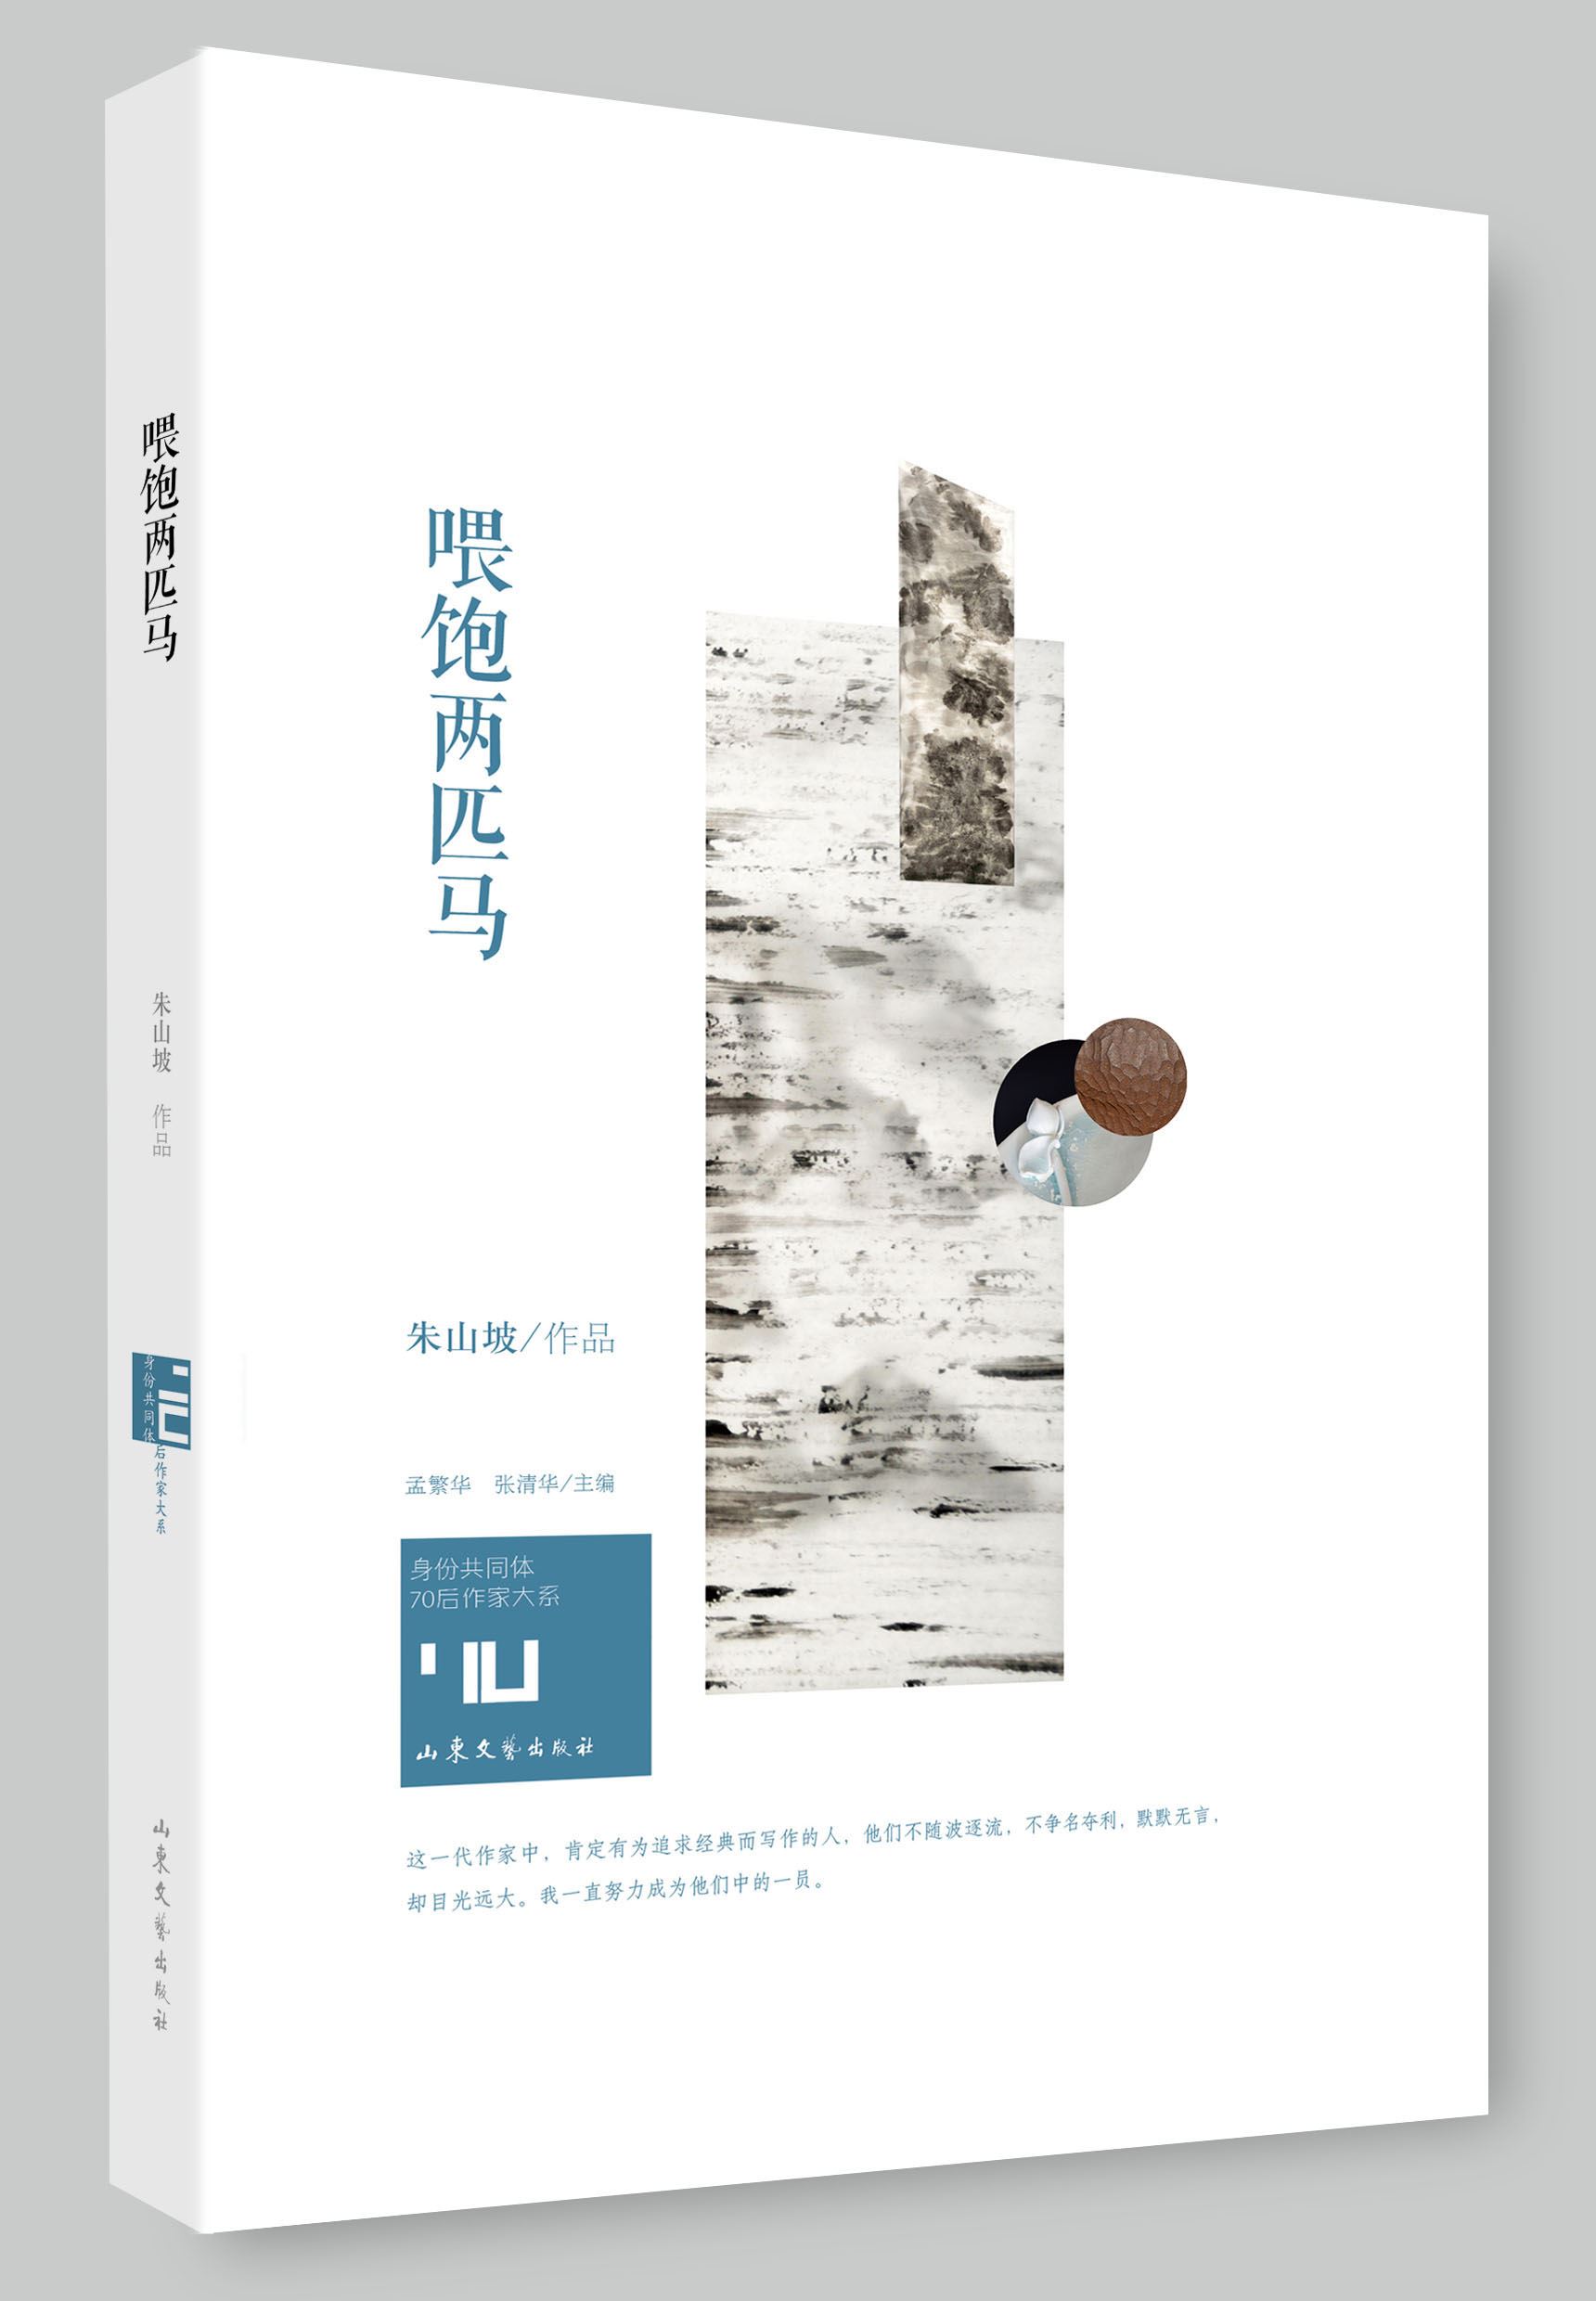 Shandong Literature and Art Publishing House Co., Ltd_The Short Stories by Authors Be Born in 1970's: Feeding Fully Two H